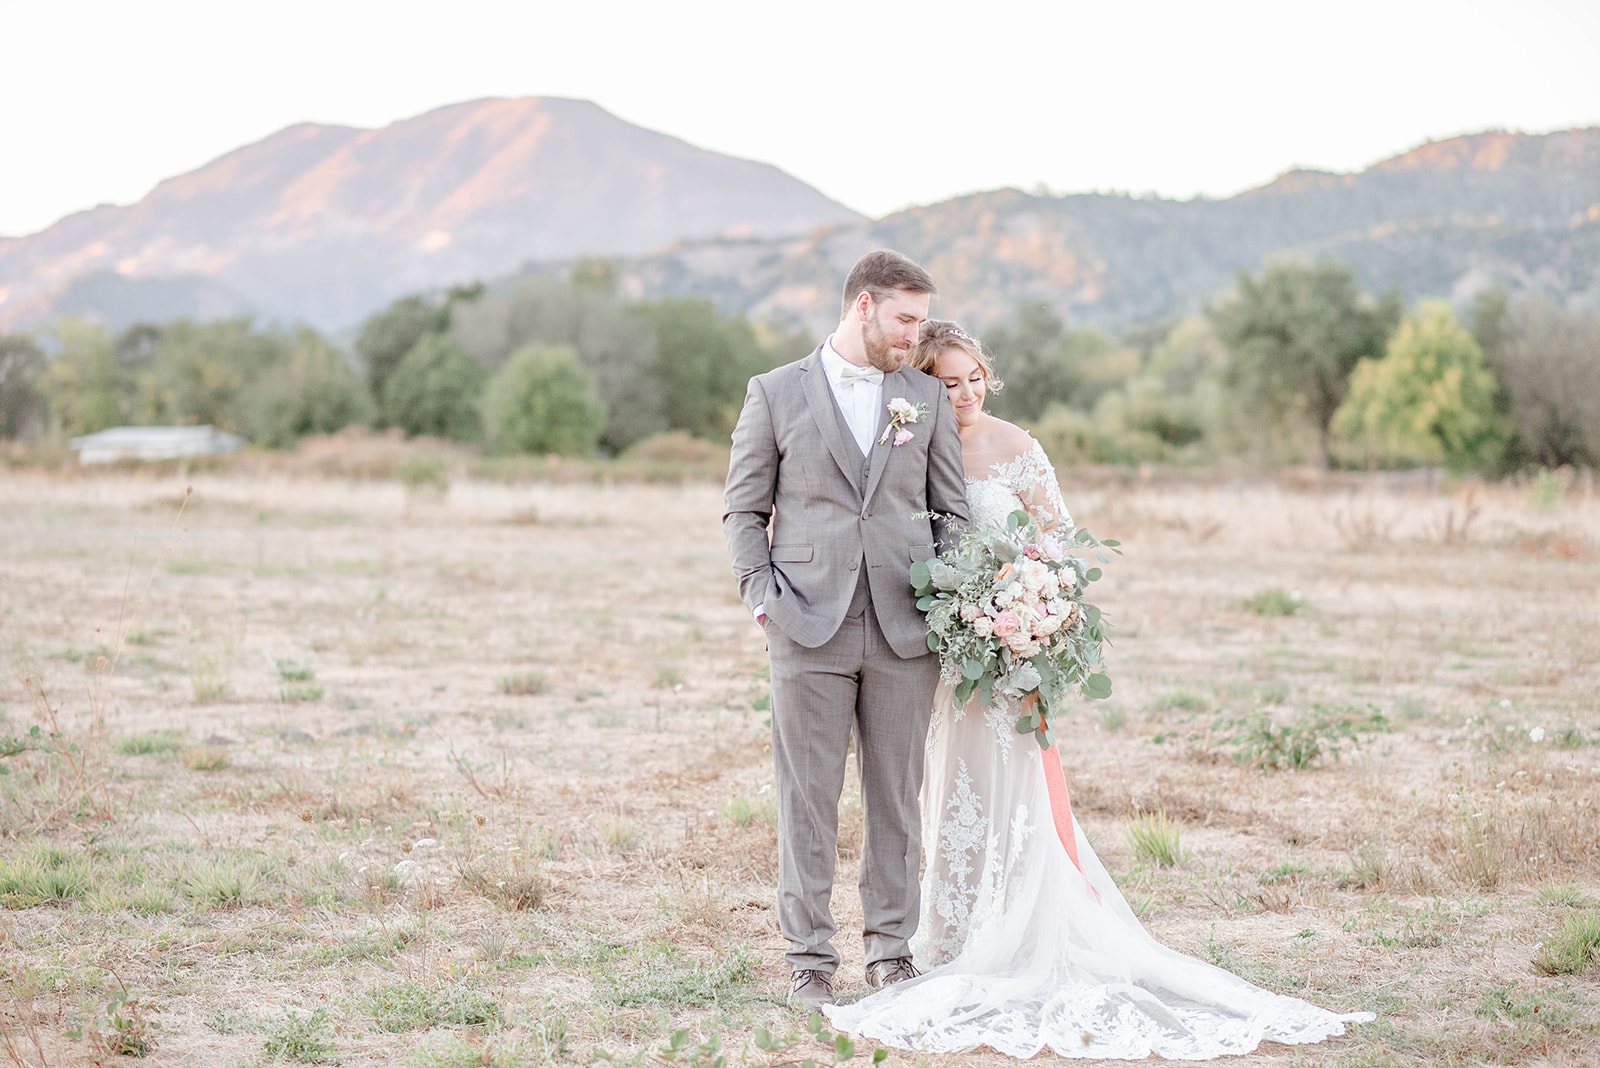 Romantic Napa Valley Editorial Inspired by Tuscany